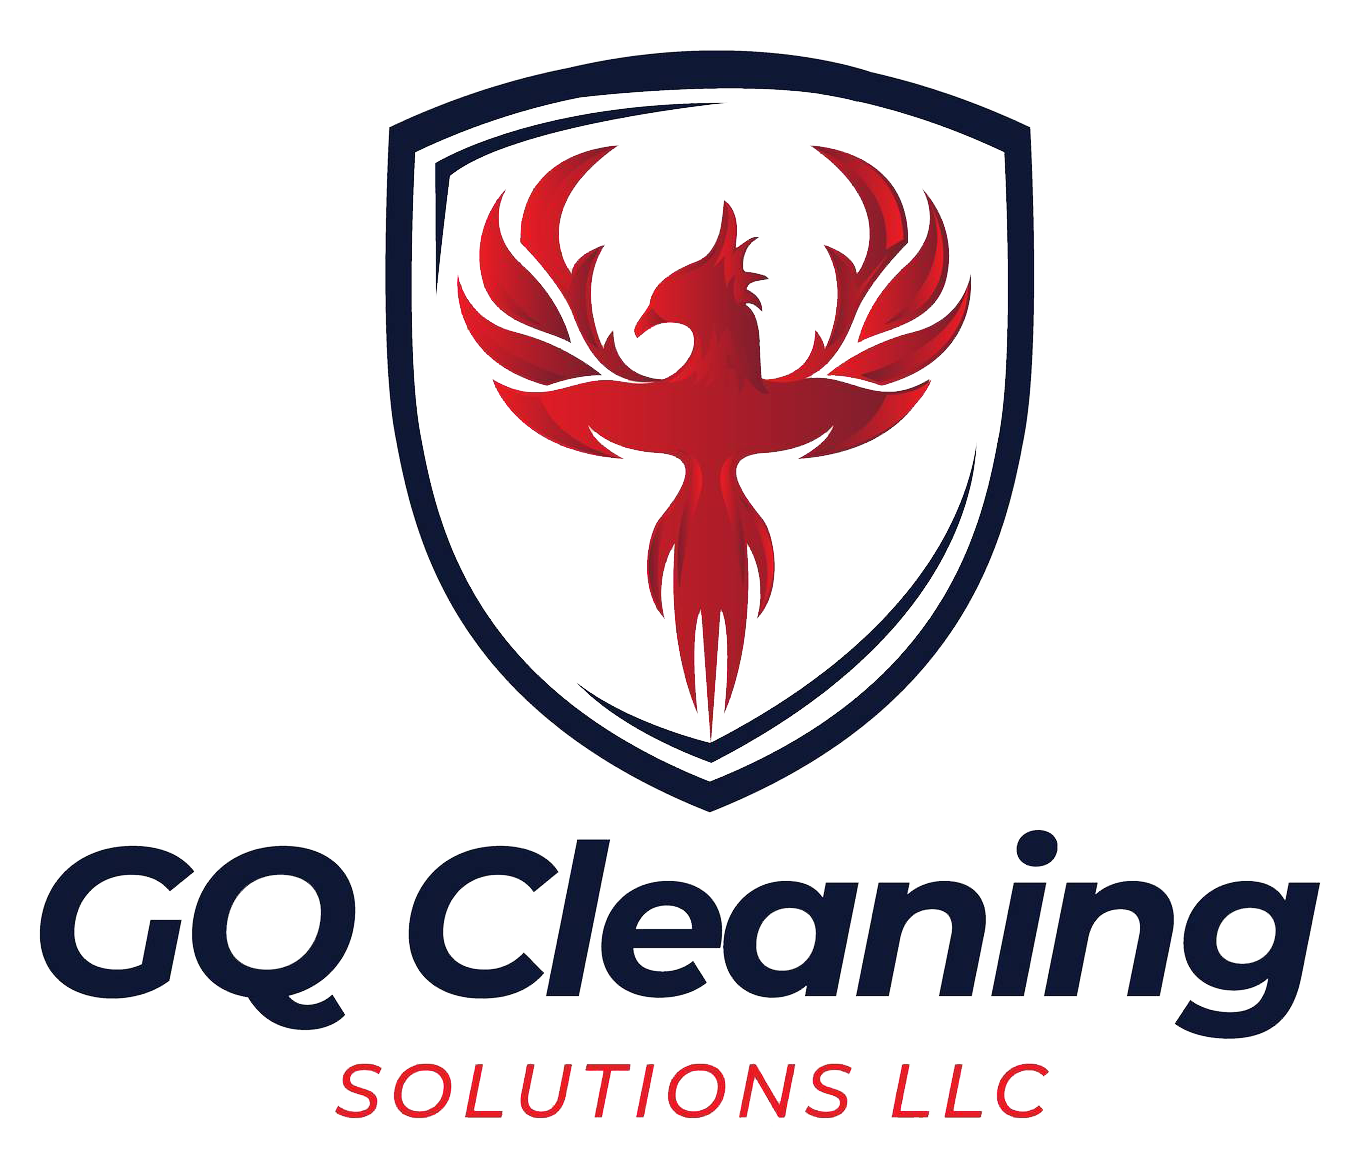 GQcleaning Solutions